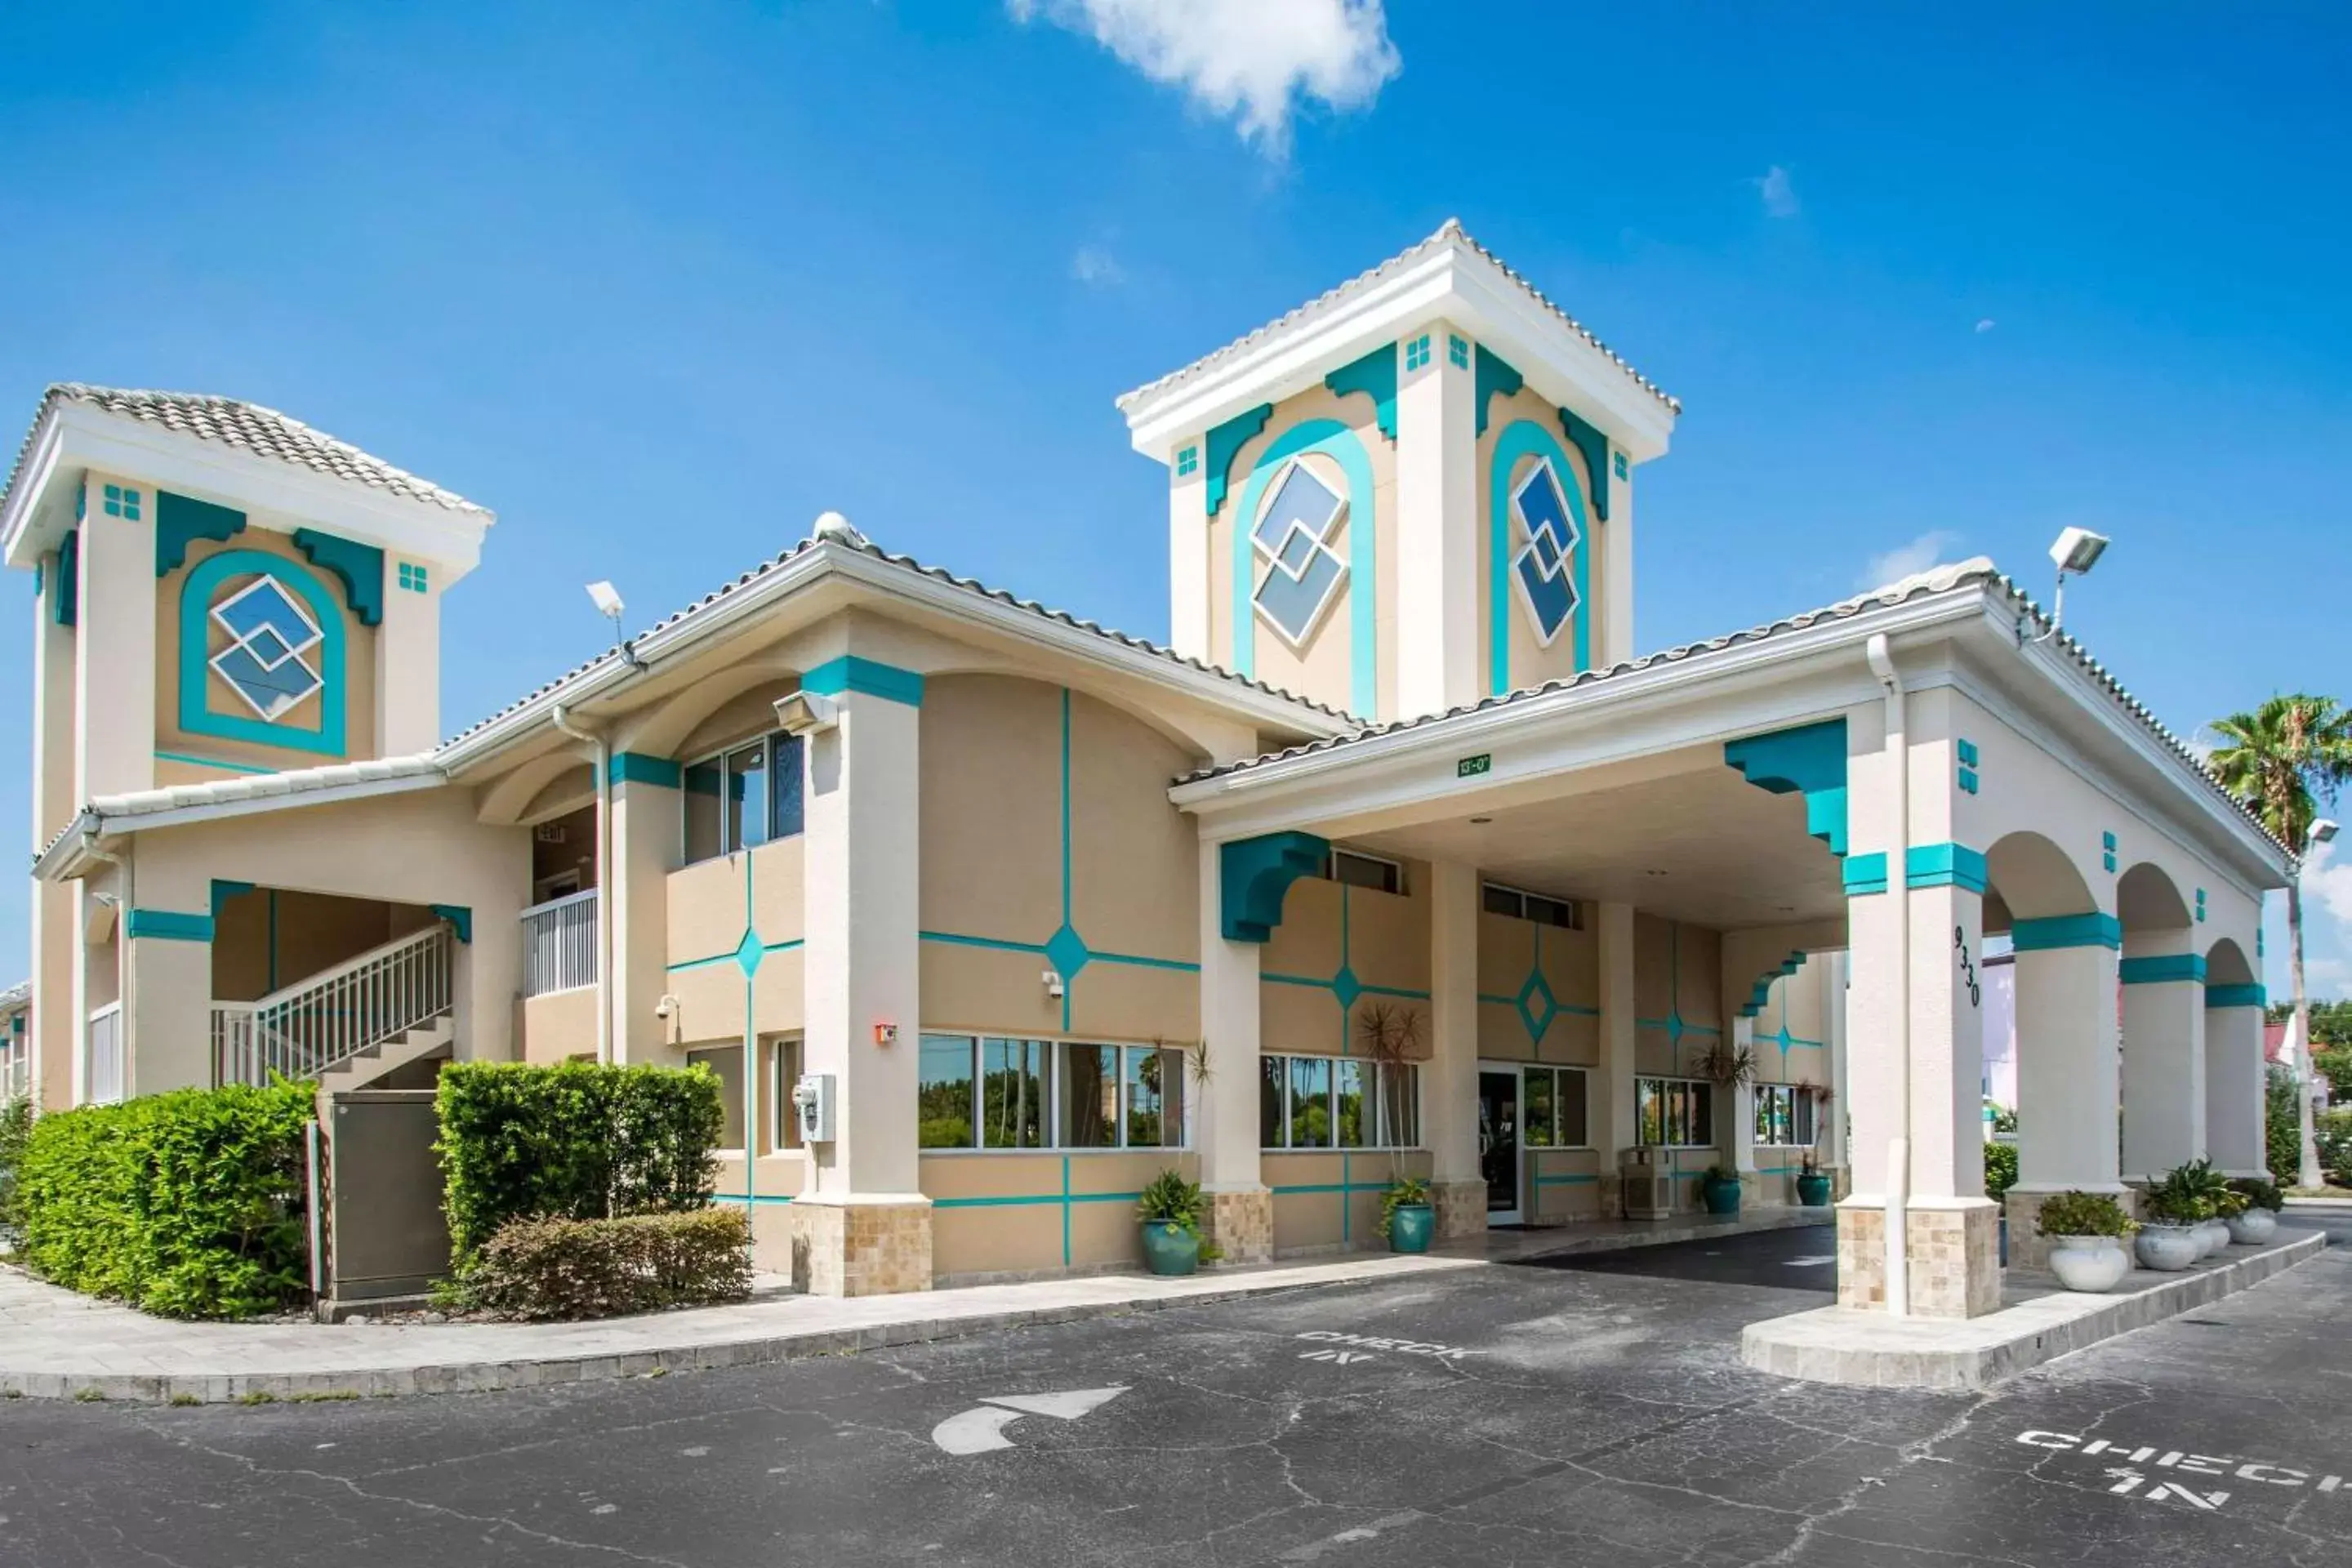 Property Building in Quality Inn Clermont West Kissimmee